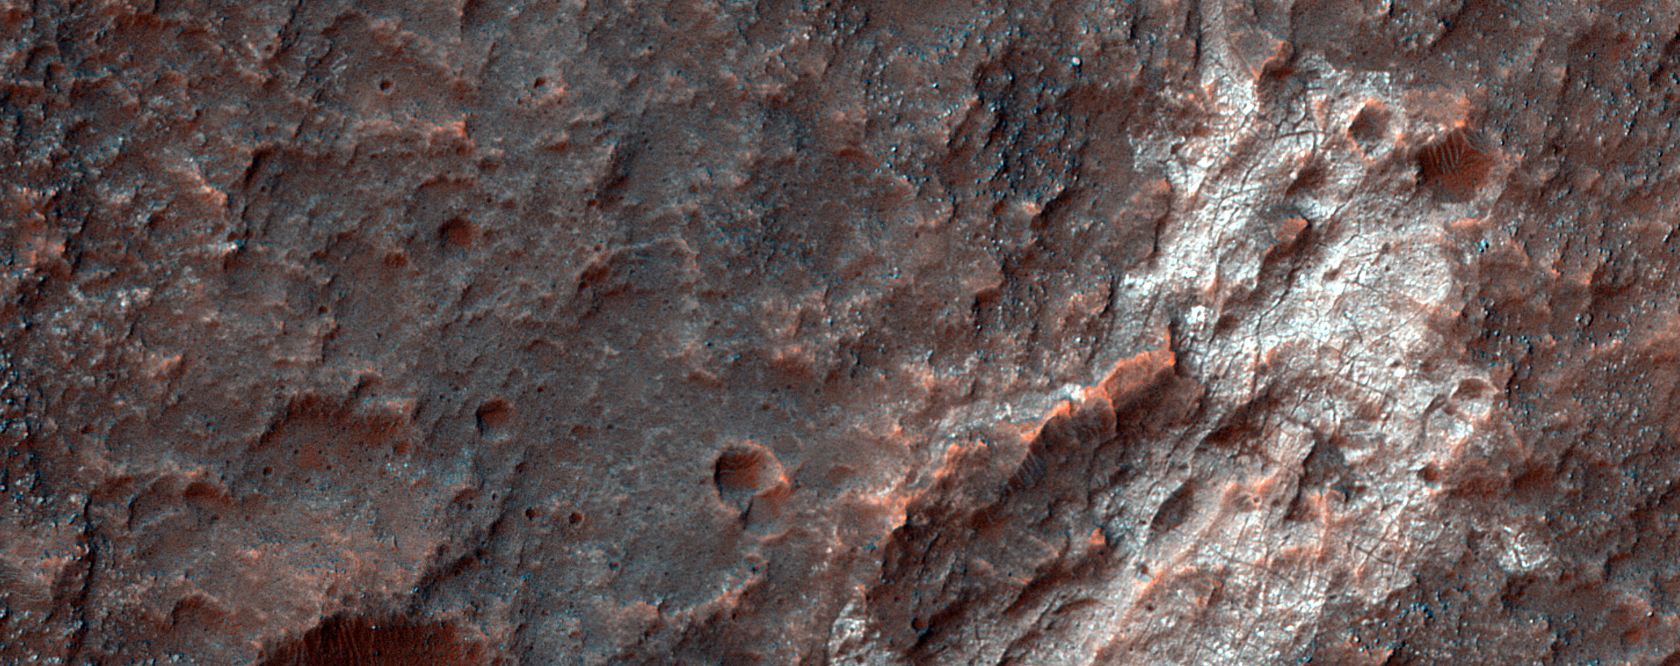 Patchy Outcrop of Light-Toned Materials